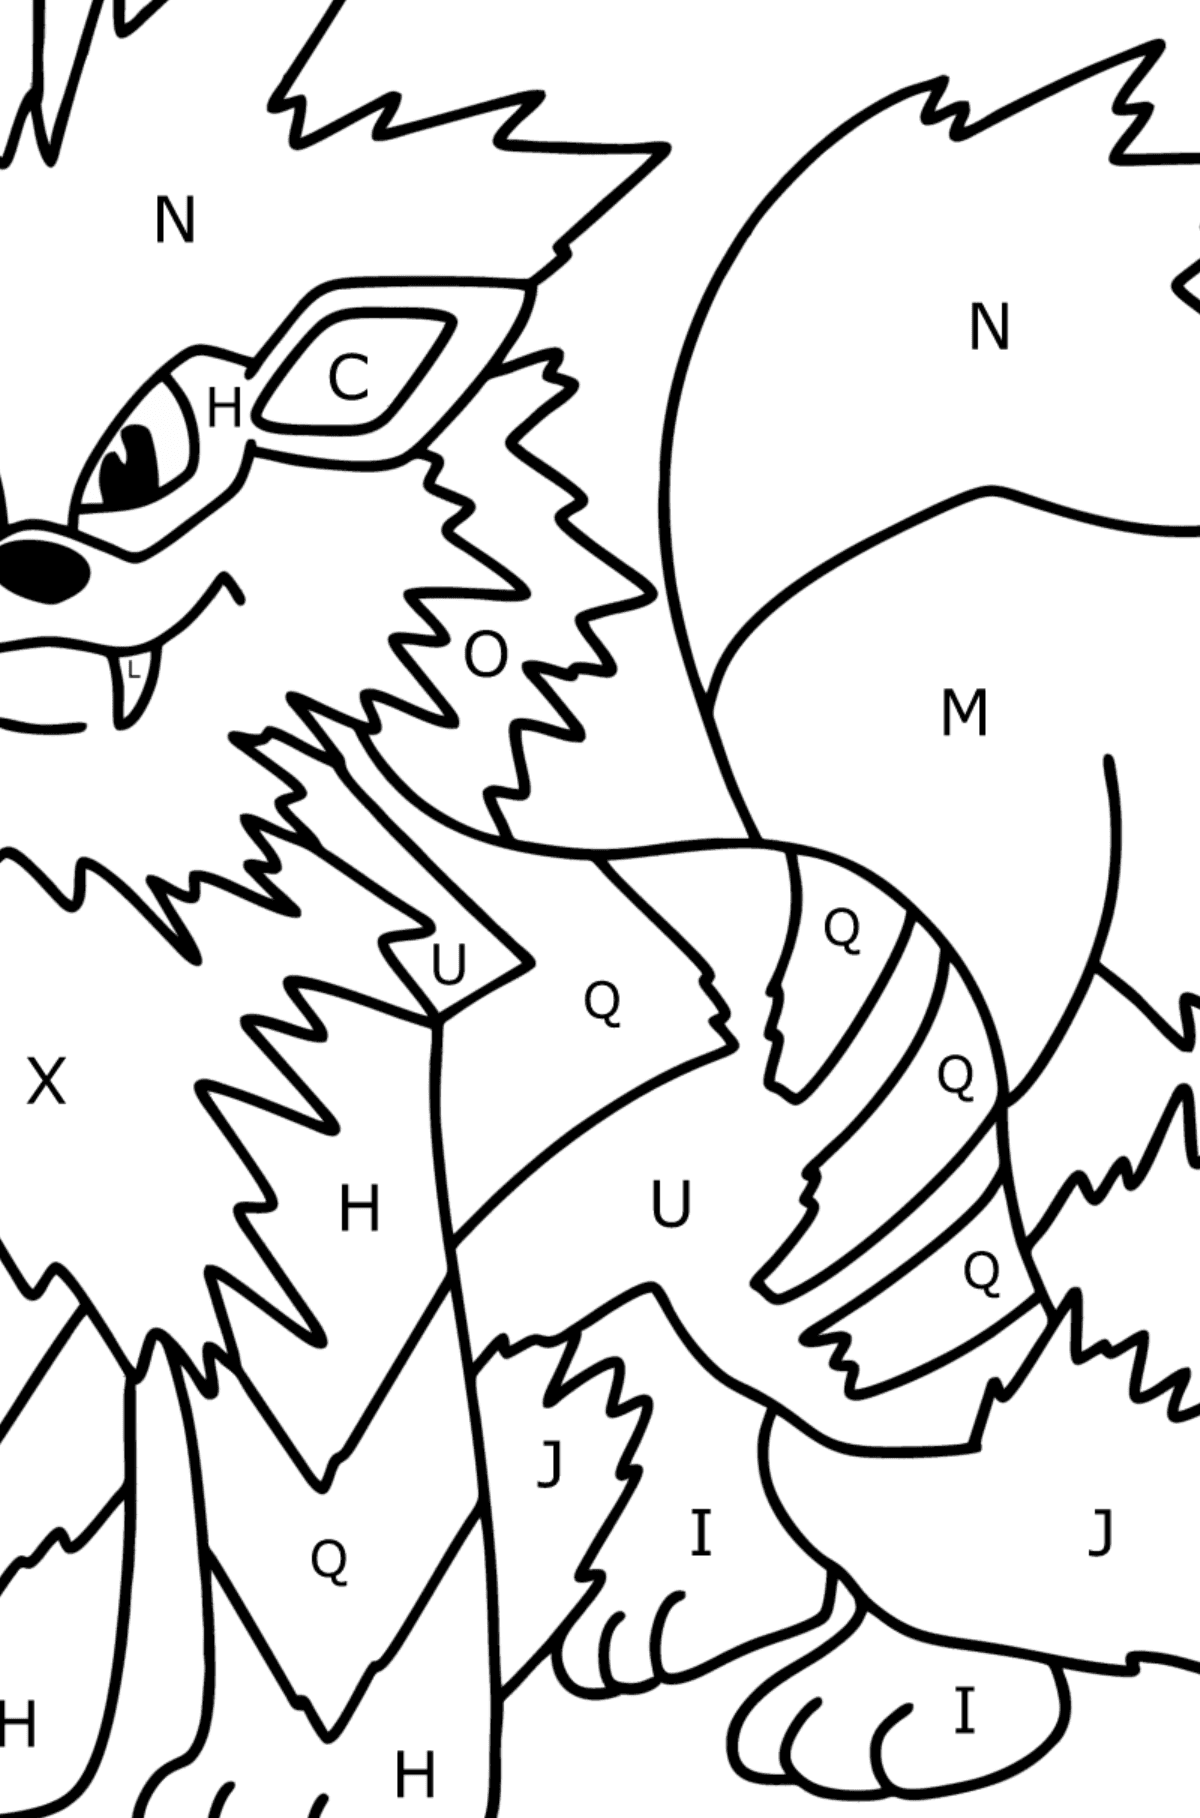 Pokémon Go Arcanine coloring page - Coloring by Letters for Kids